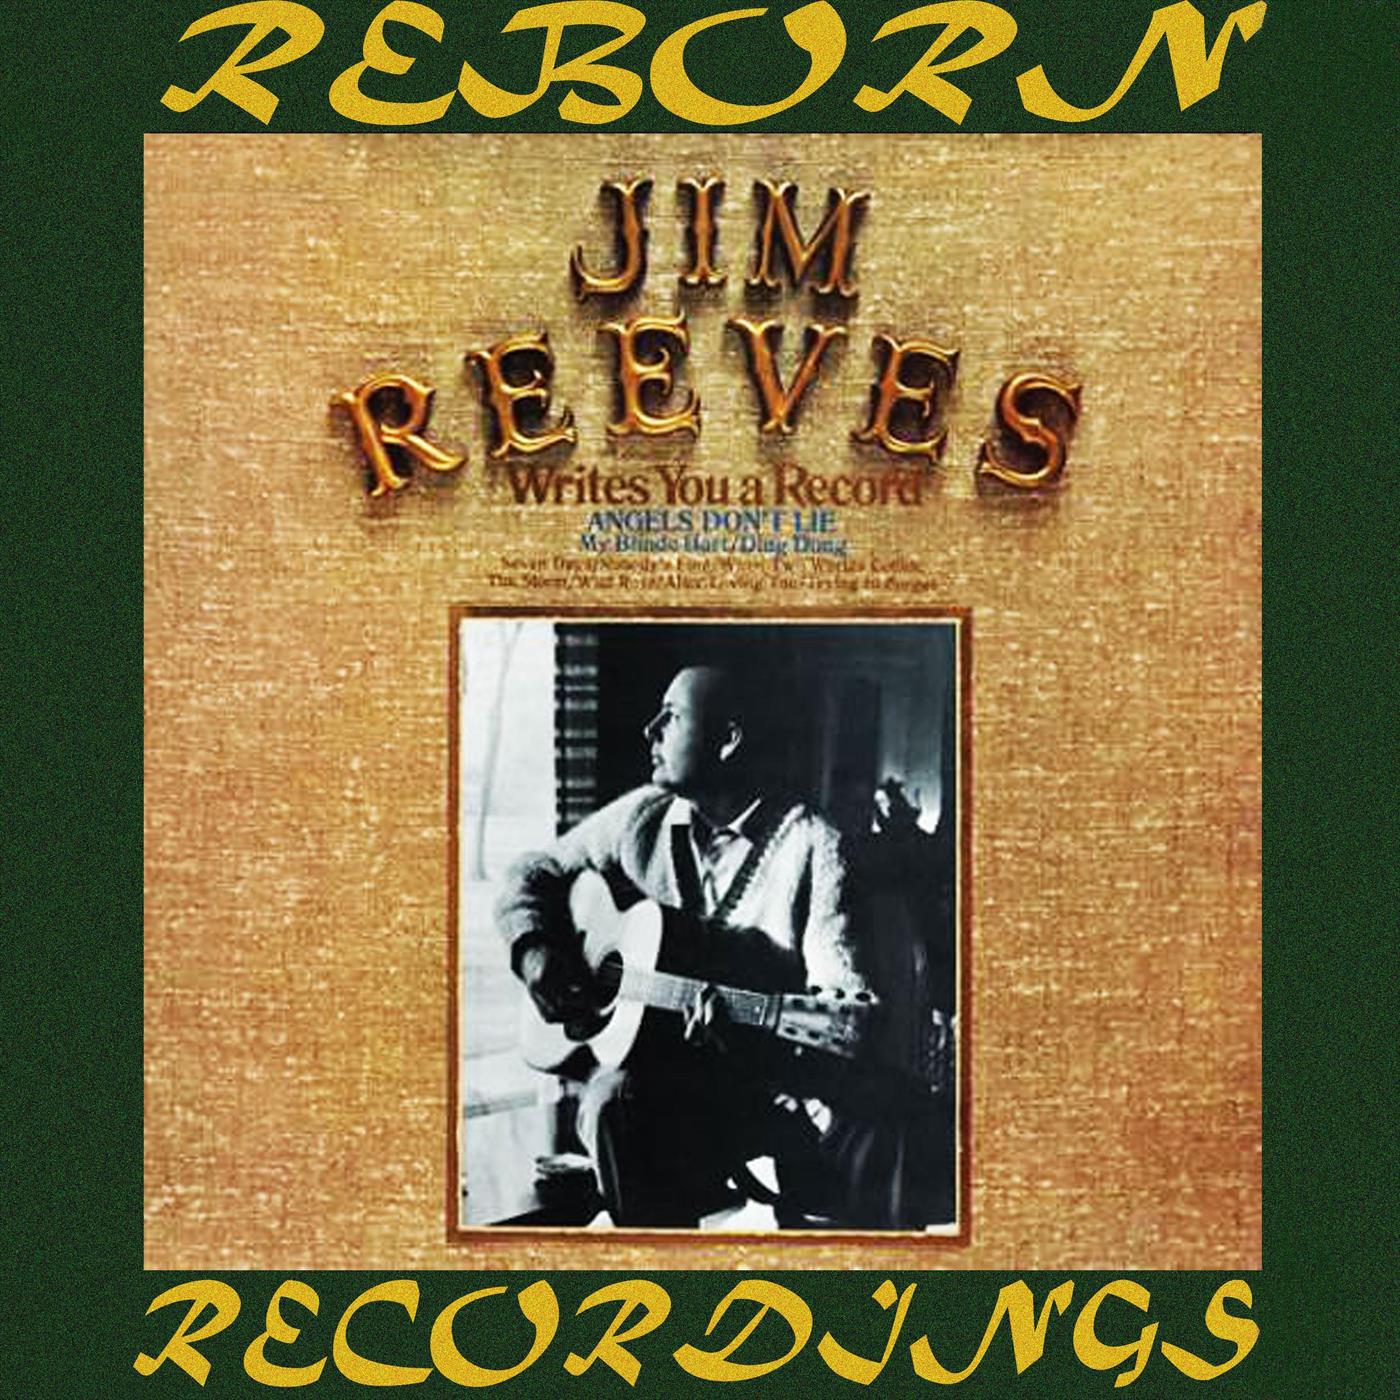 Jim Reeves Writes You a Record (HD Remastered)